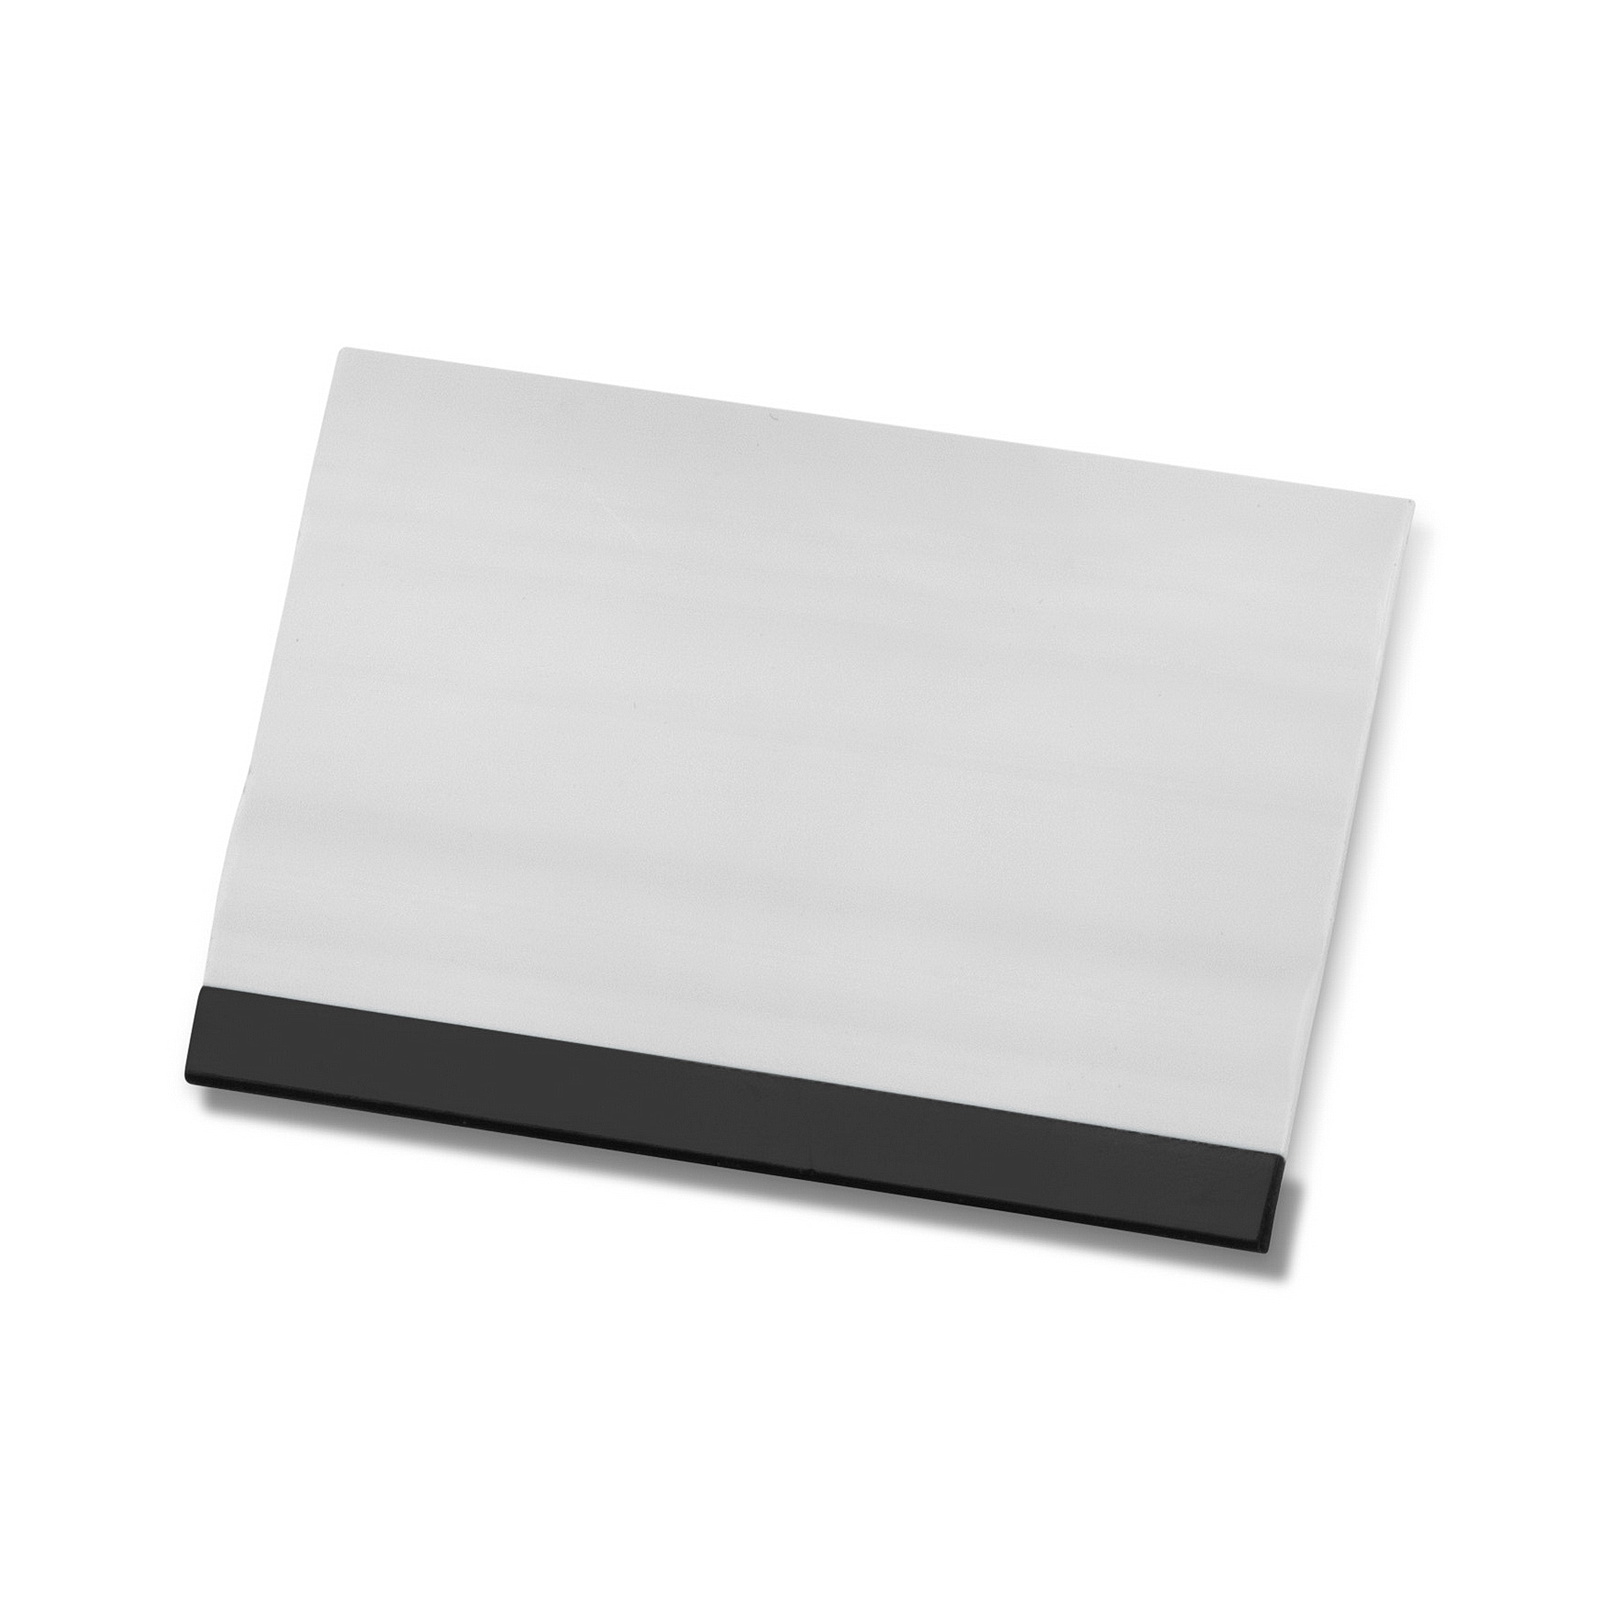 3'' x 2'' White Squeegee, with Black Soft Rubber Edge for Vinyl and Film Application